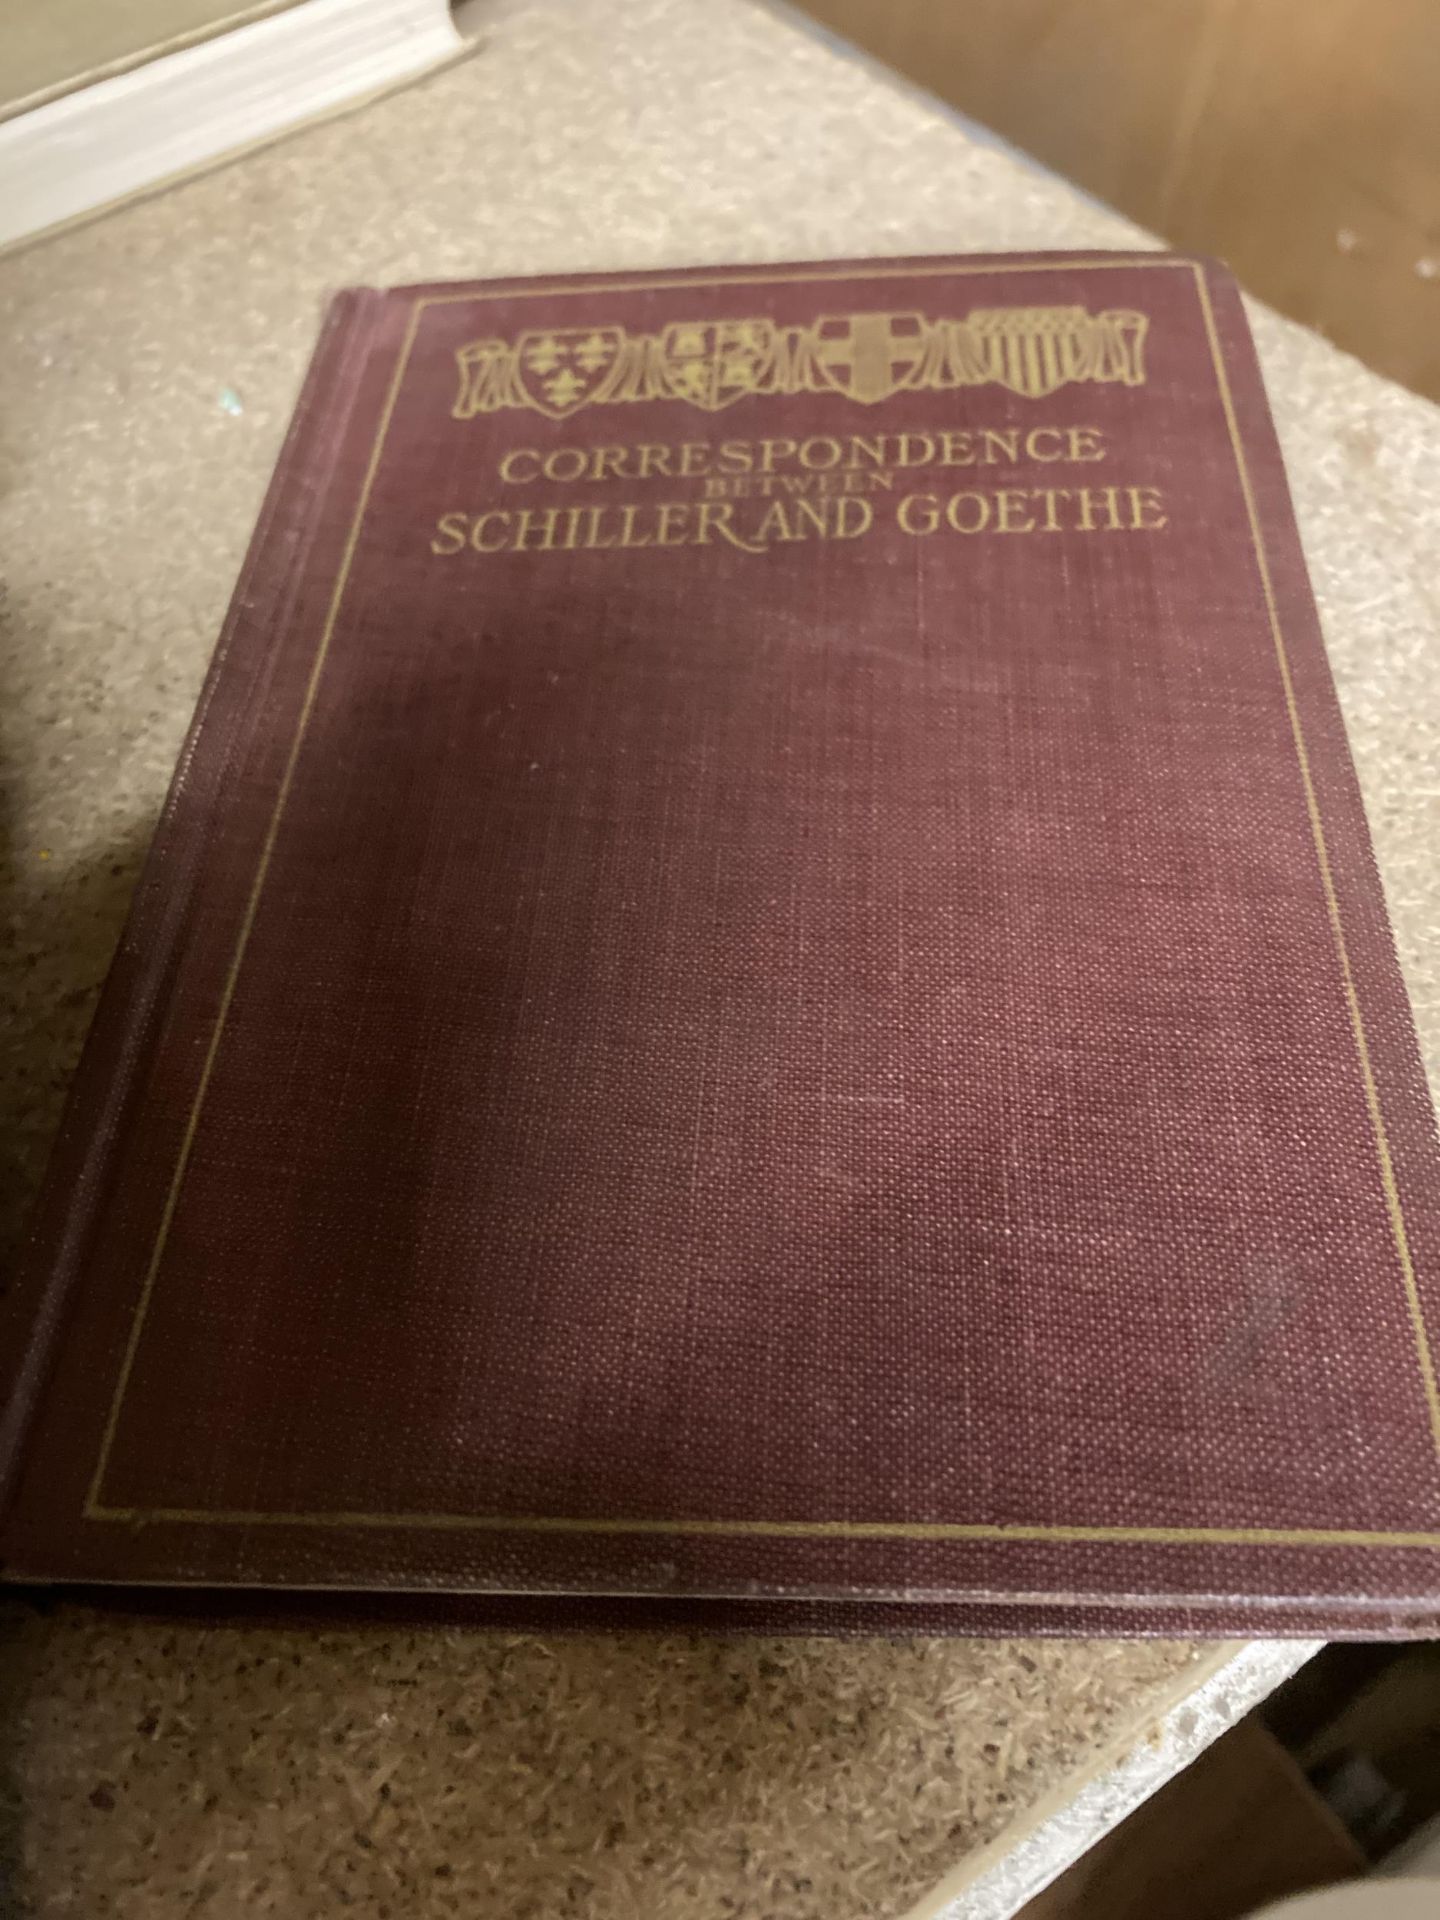 A SMALL QUANTITY OF BOOKS TO INCLUDE GOTTFRIED KELLER WERKE, AN ANTHOLOGY OF GERMAN POETRY BY JETHRO - Image 3 of 6